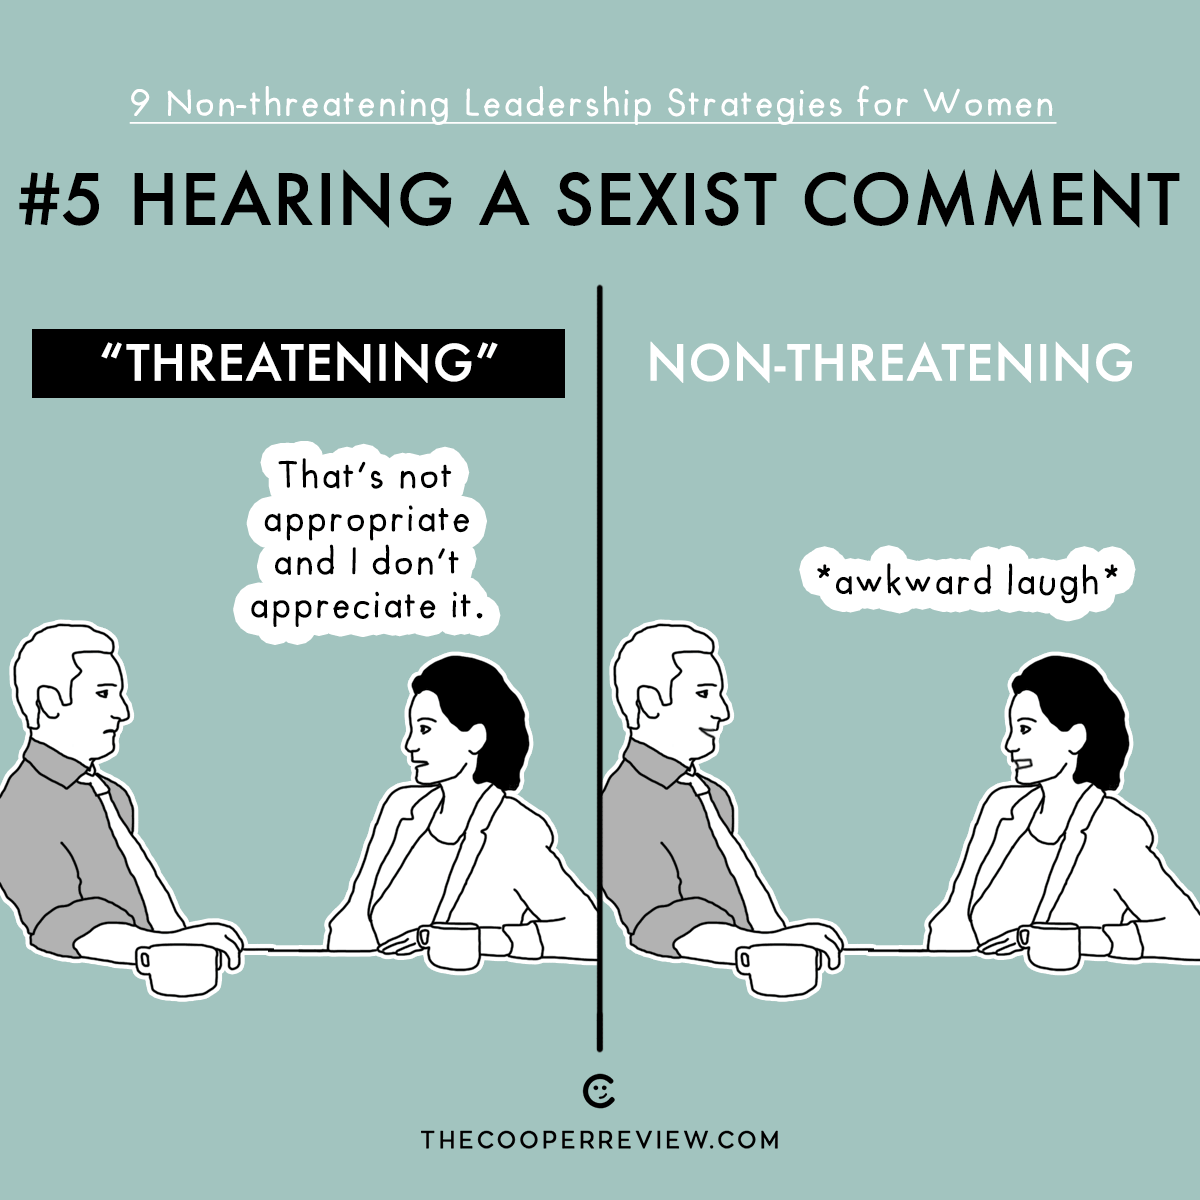 #5 Hearing a Sexist Comment. Threatening: That's not appropriate and I don't appreciate it. Non-threatening: *awkward laugh*